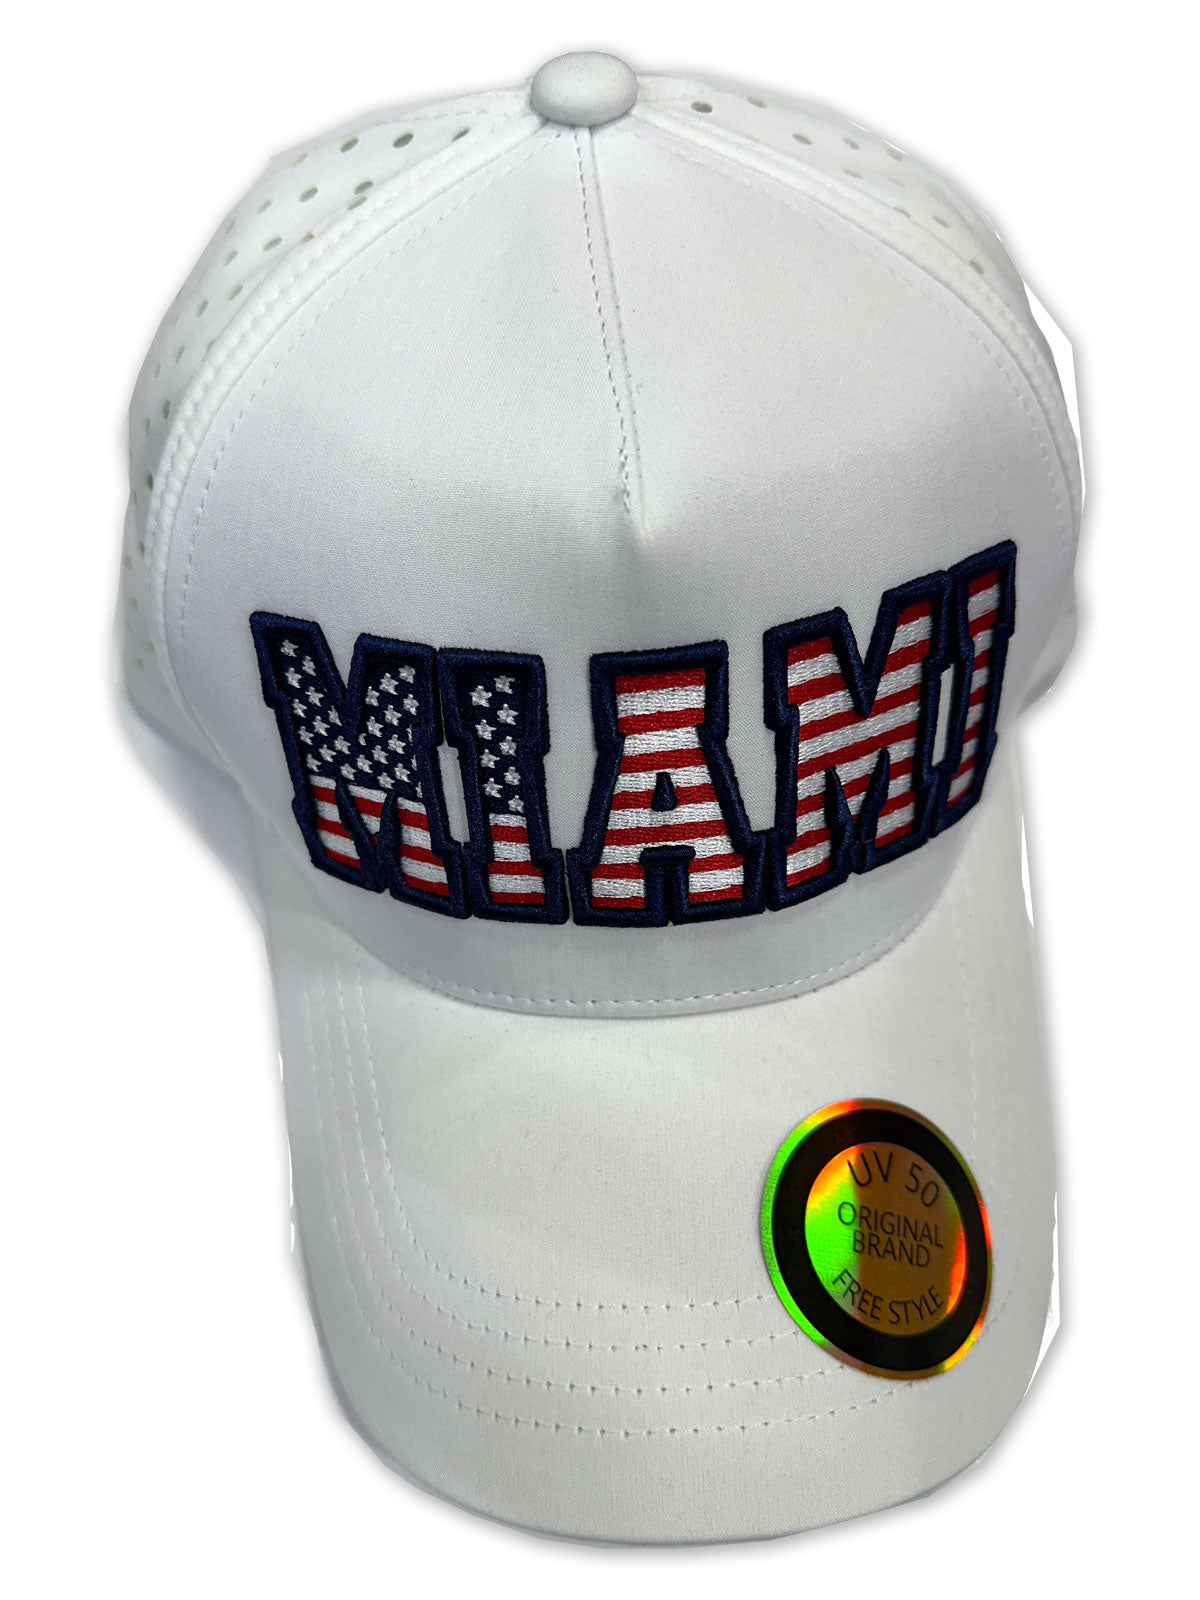 Miami Breathable Mesh Polyester Hats Assortment, Adult Size UV 50 - One Size Fits Most, Dad or Mom Gift Baseball Cap